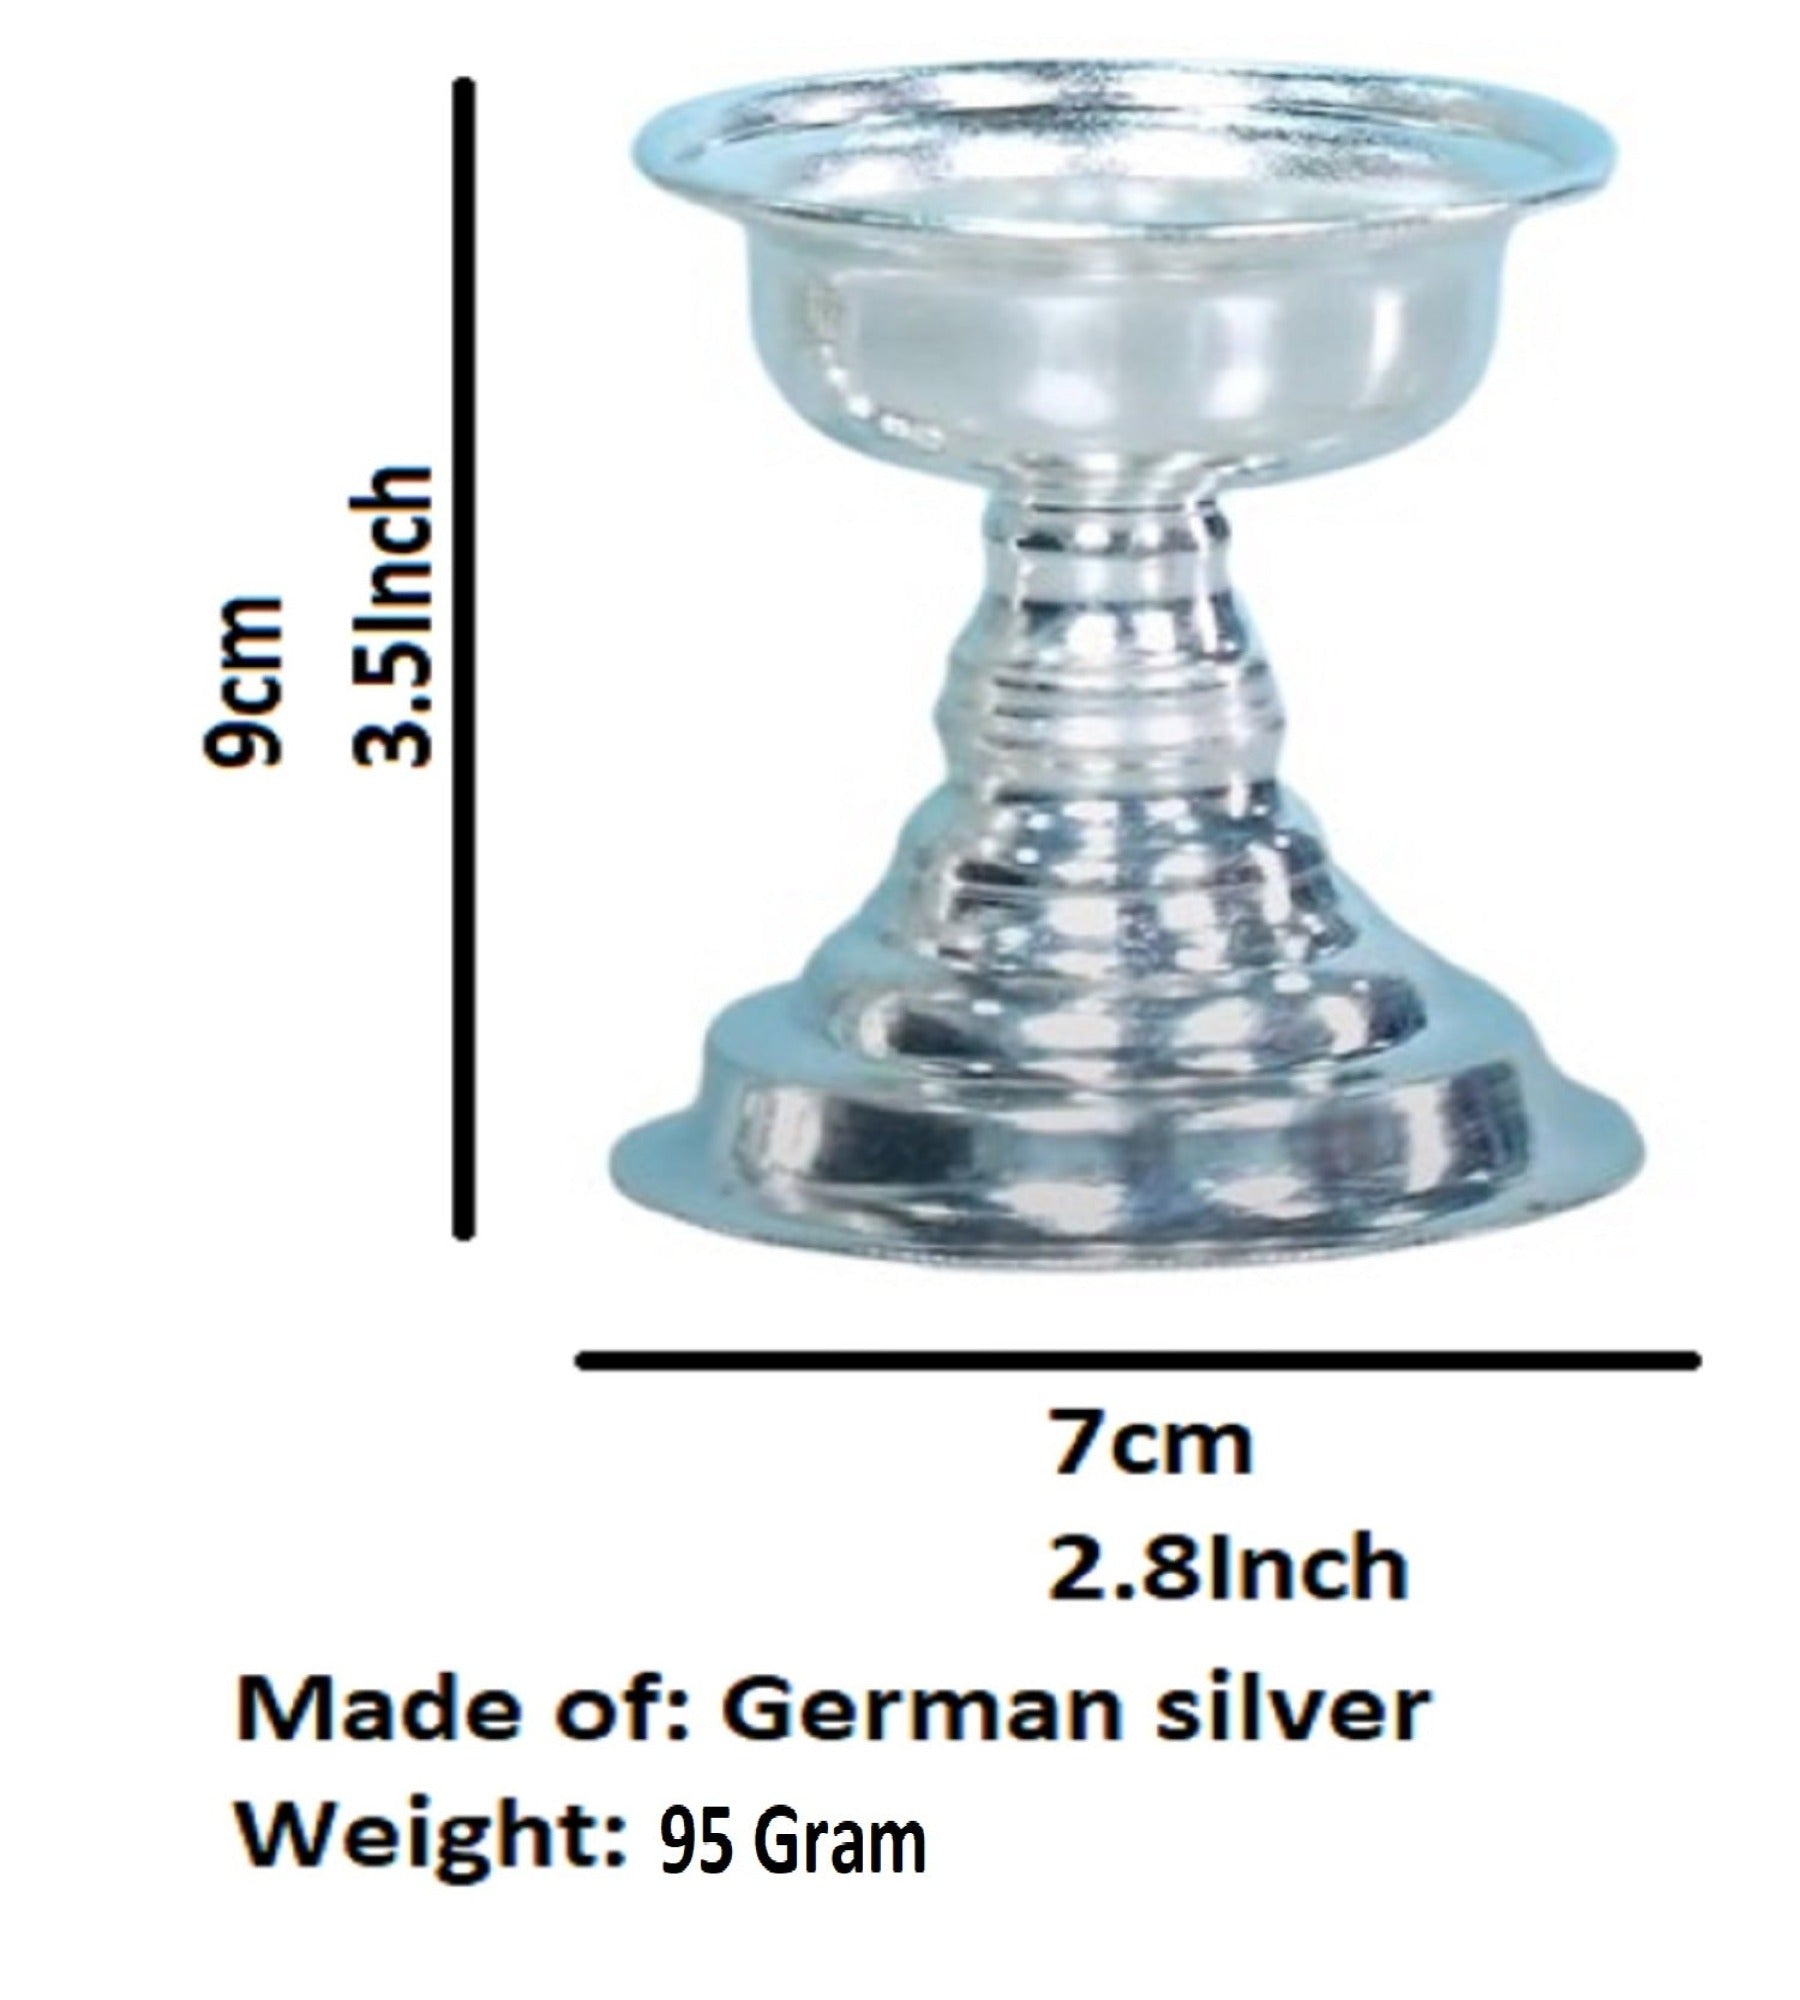 8X6 Cm Deepa Made by Pure German Silver For Pooja K4161